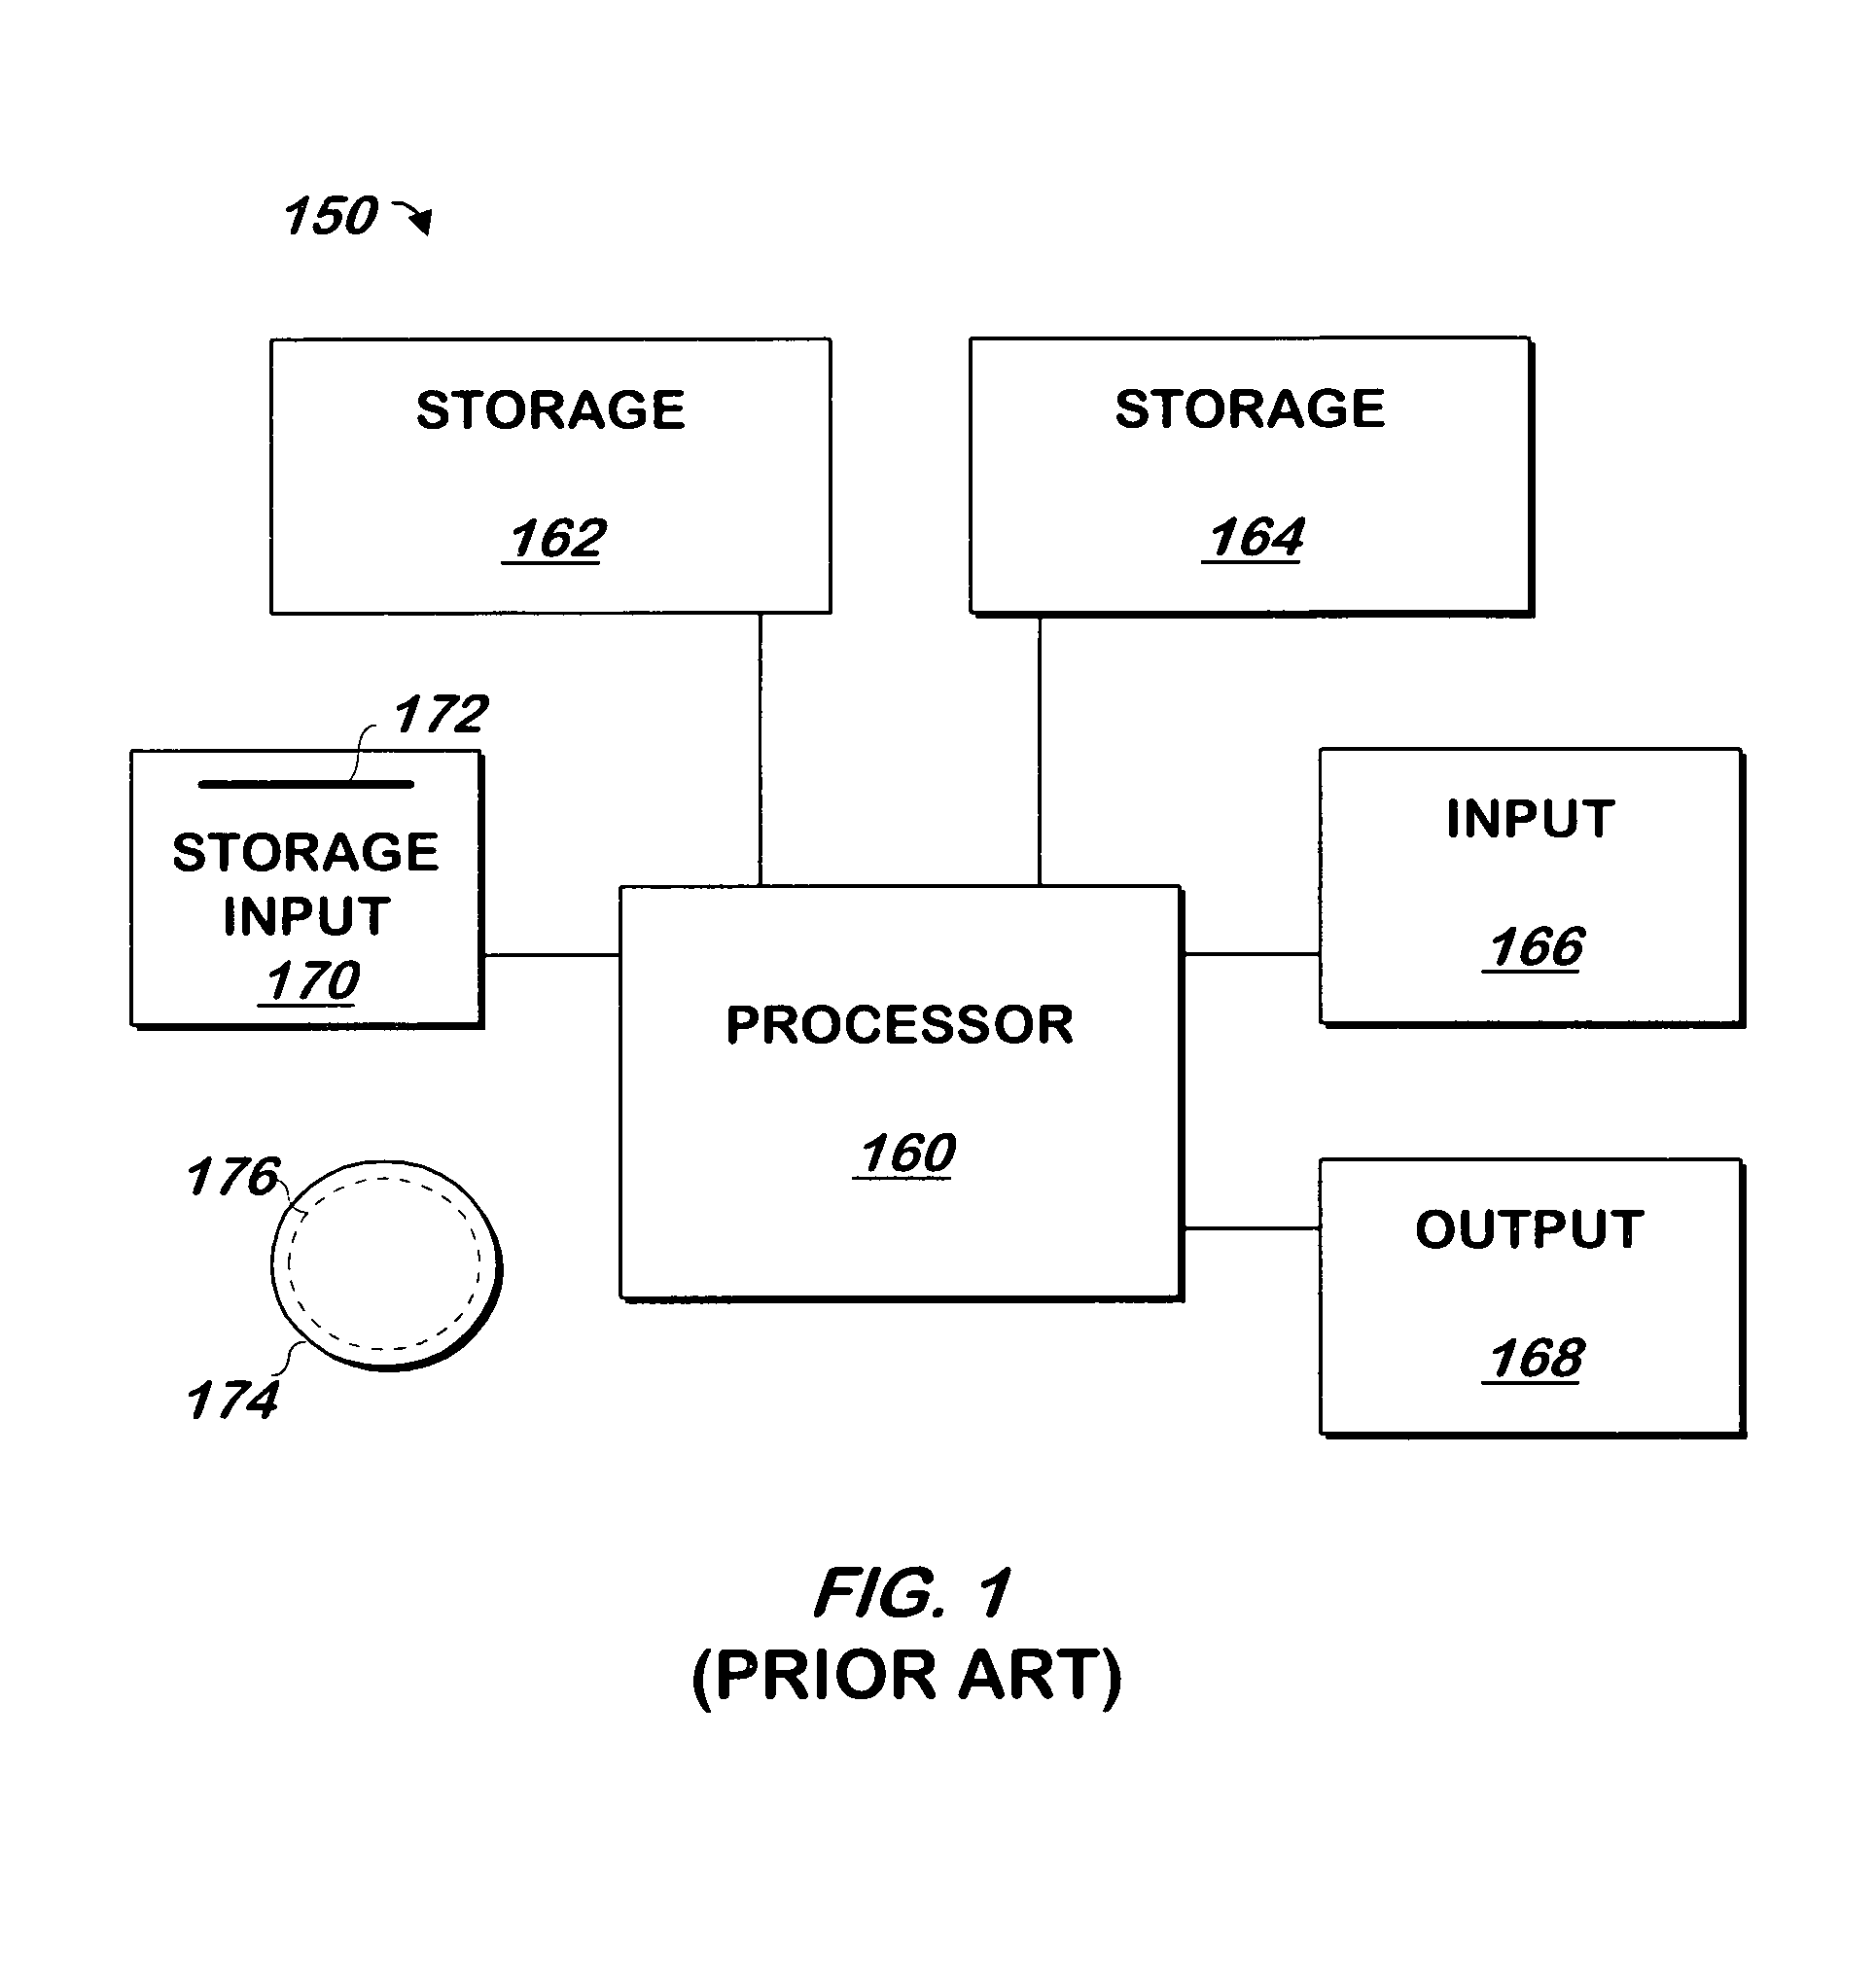 System and method for identifying an ingress router of a flow when no IP address is associated with the interface from which the flow was received